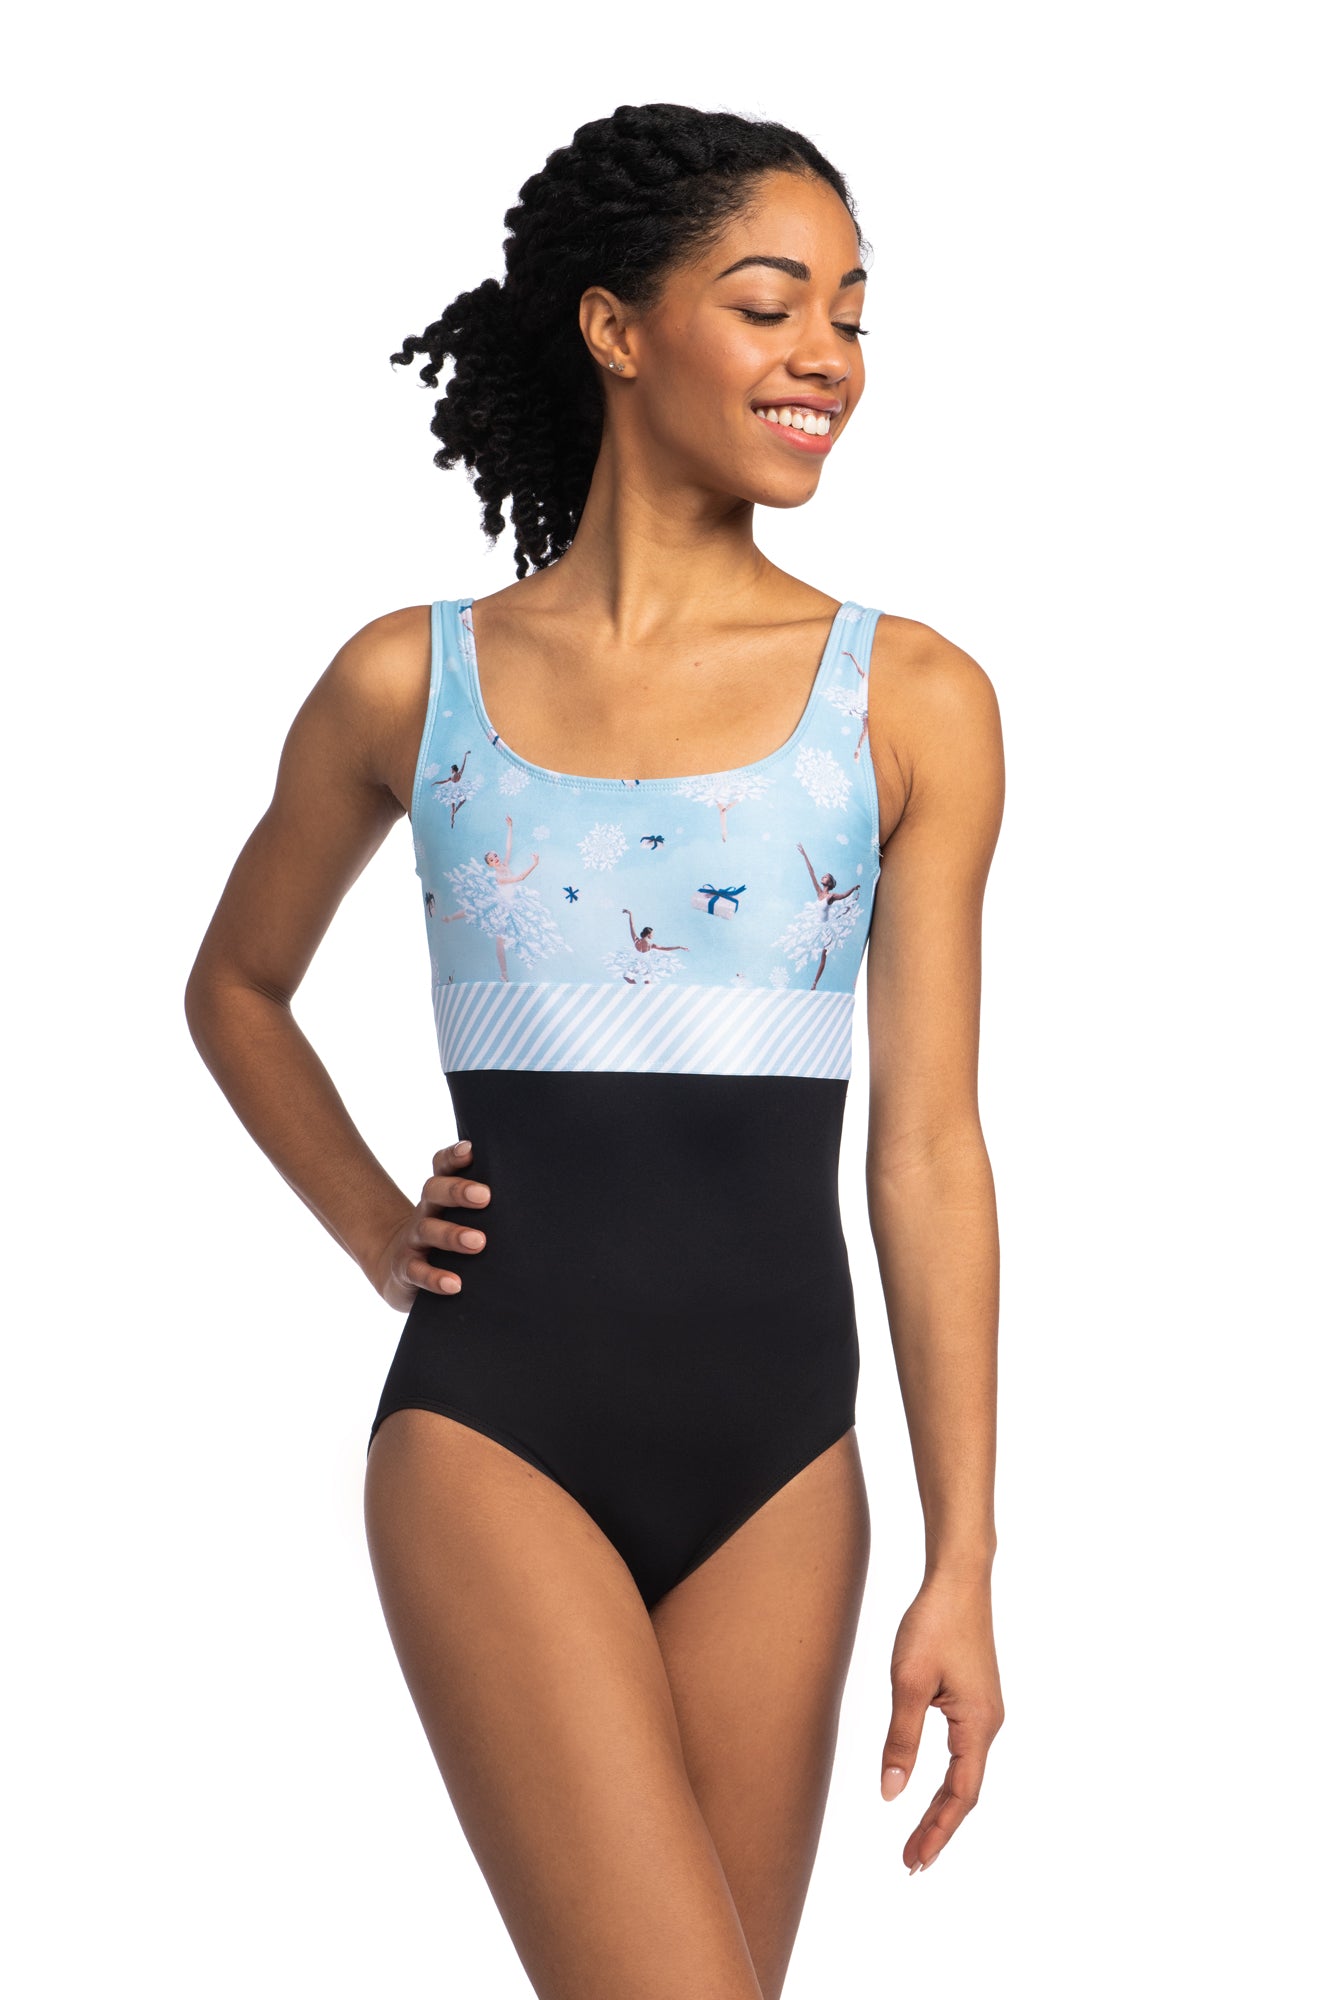 AinslieWear 101PG Princess Strap with Pinch Girls Leotard – The Shoe Room